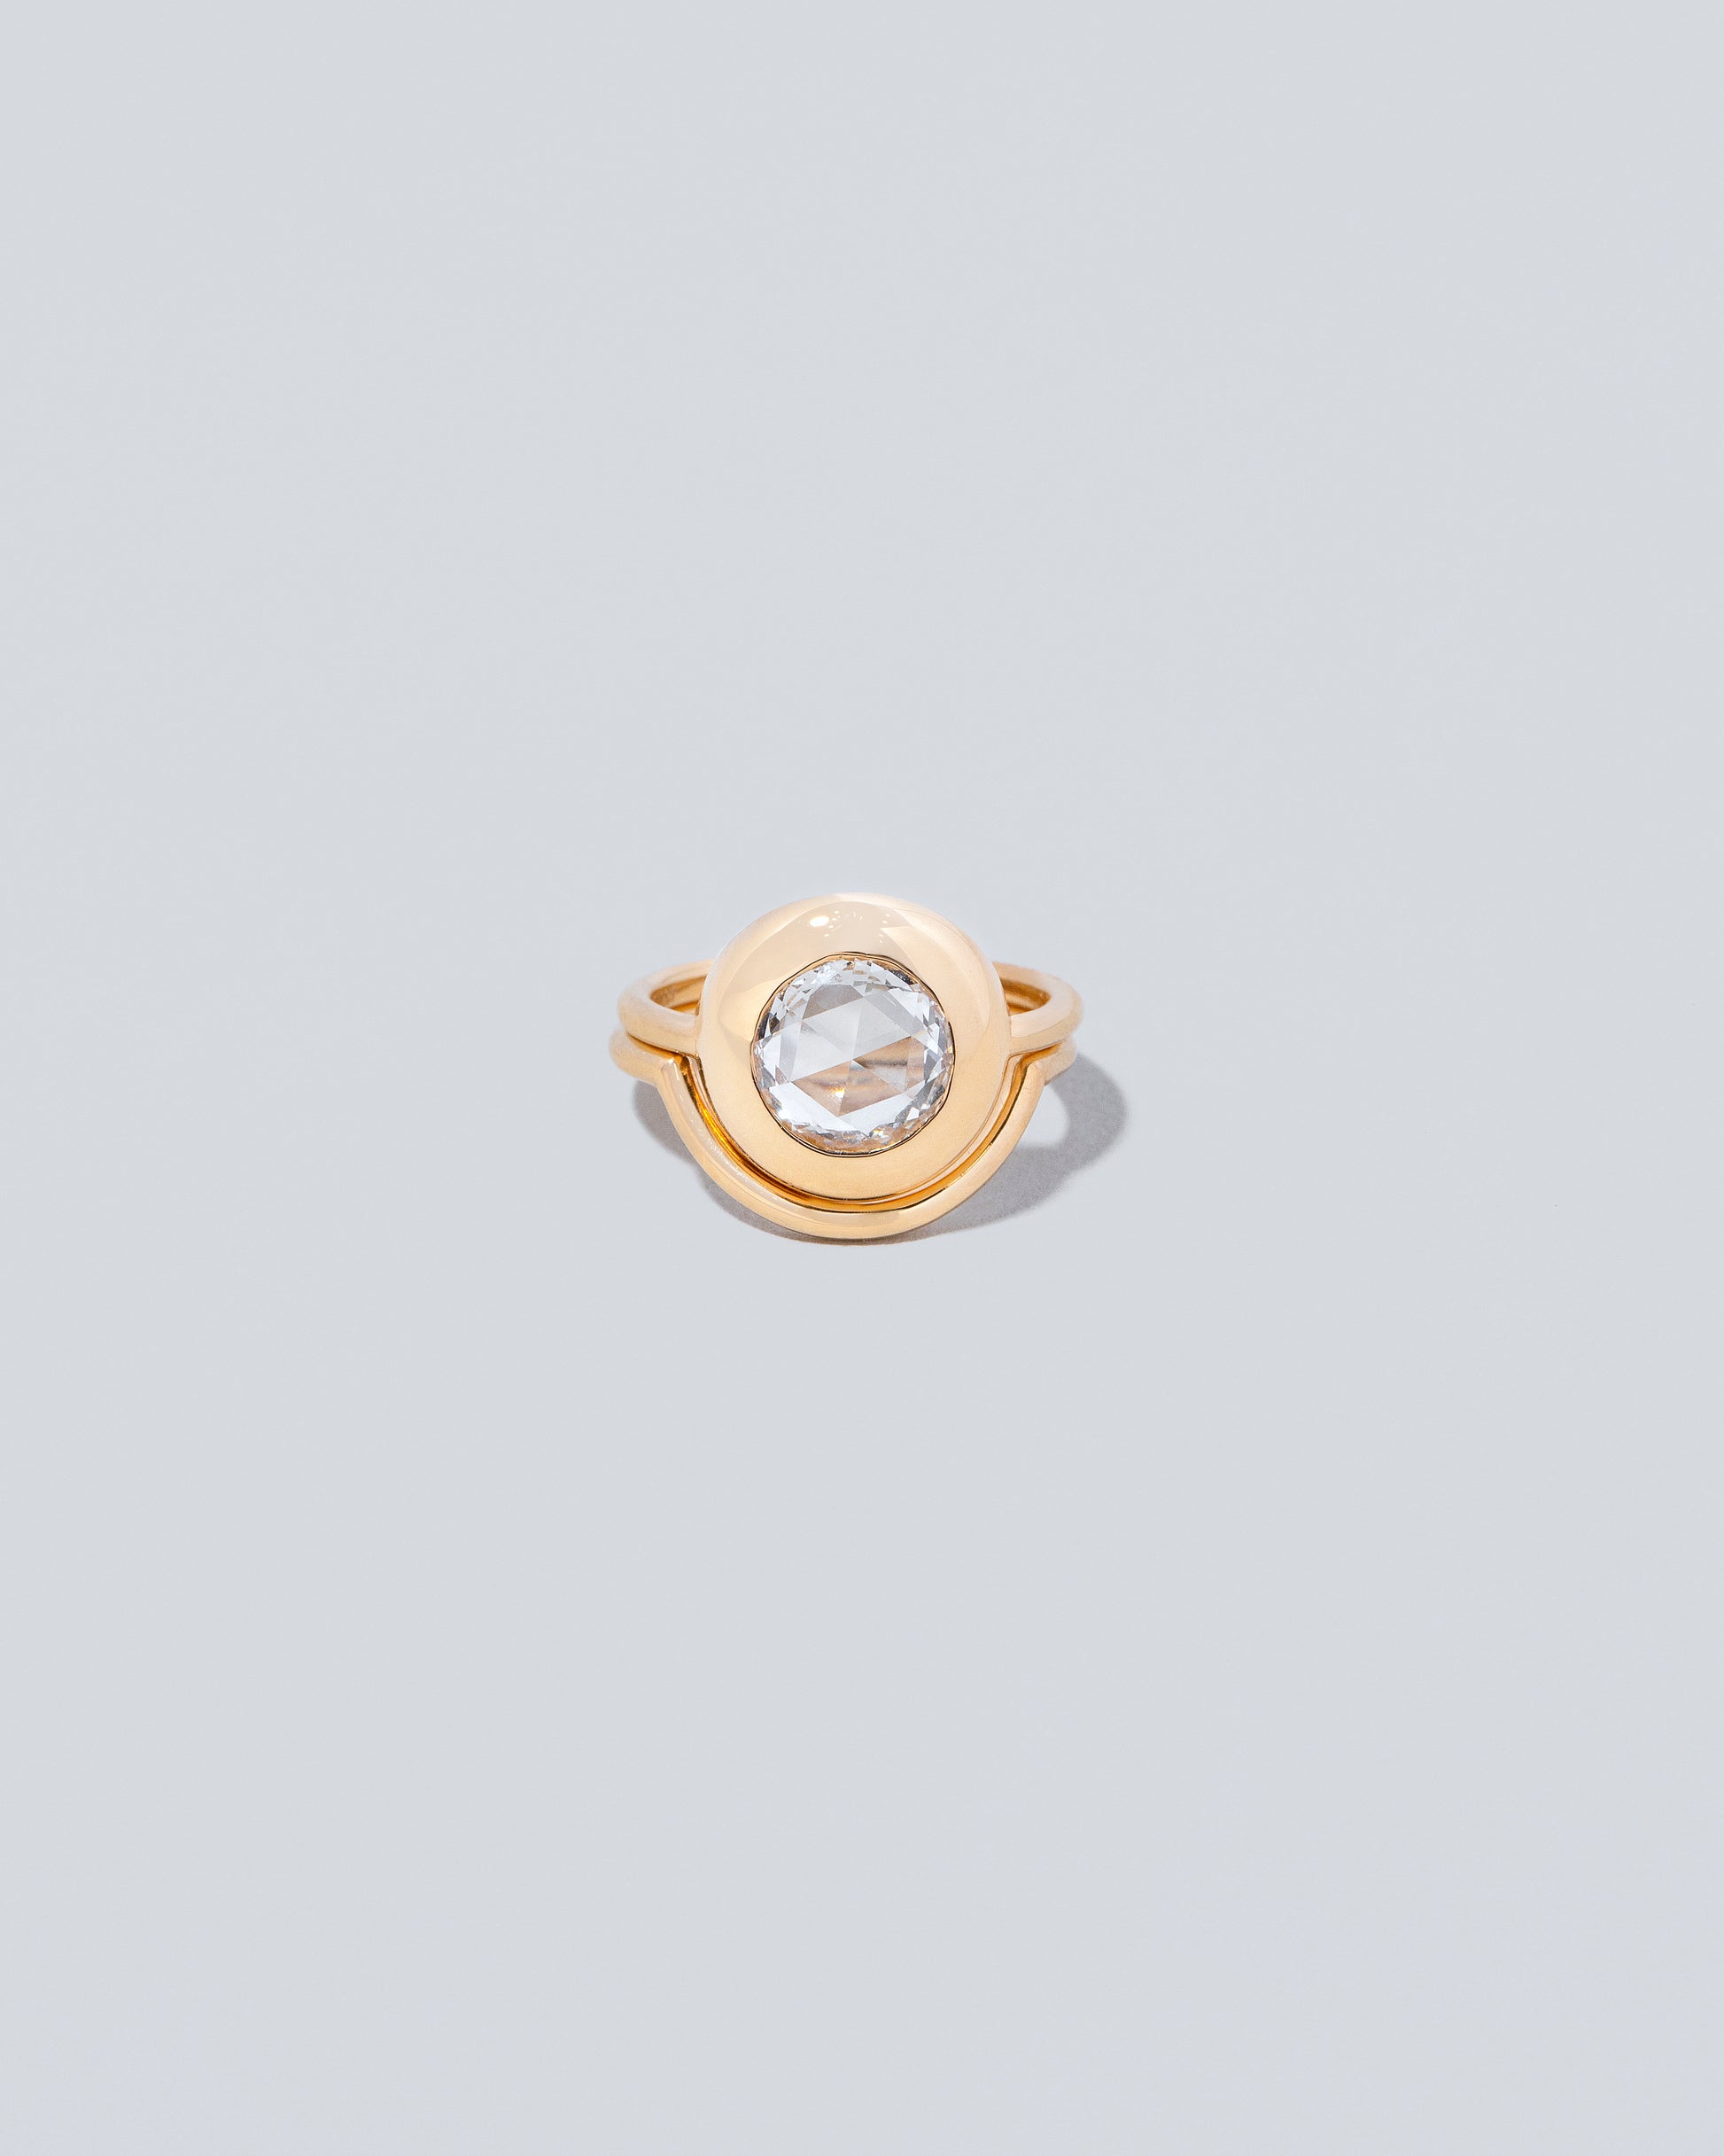 Grand Exposition Ring with Exposition Band on light colored background.